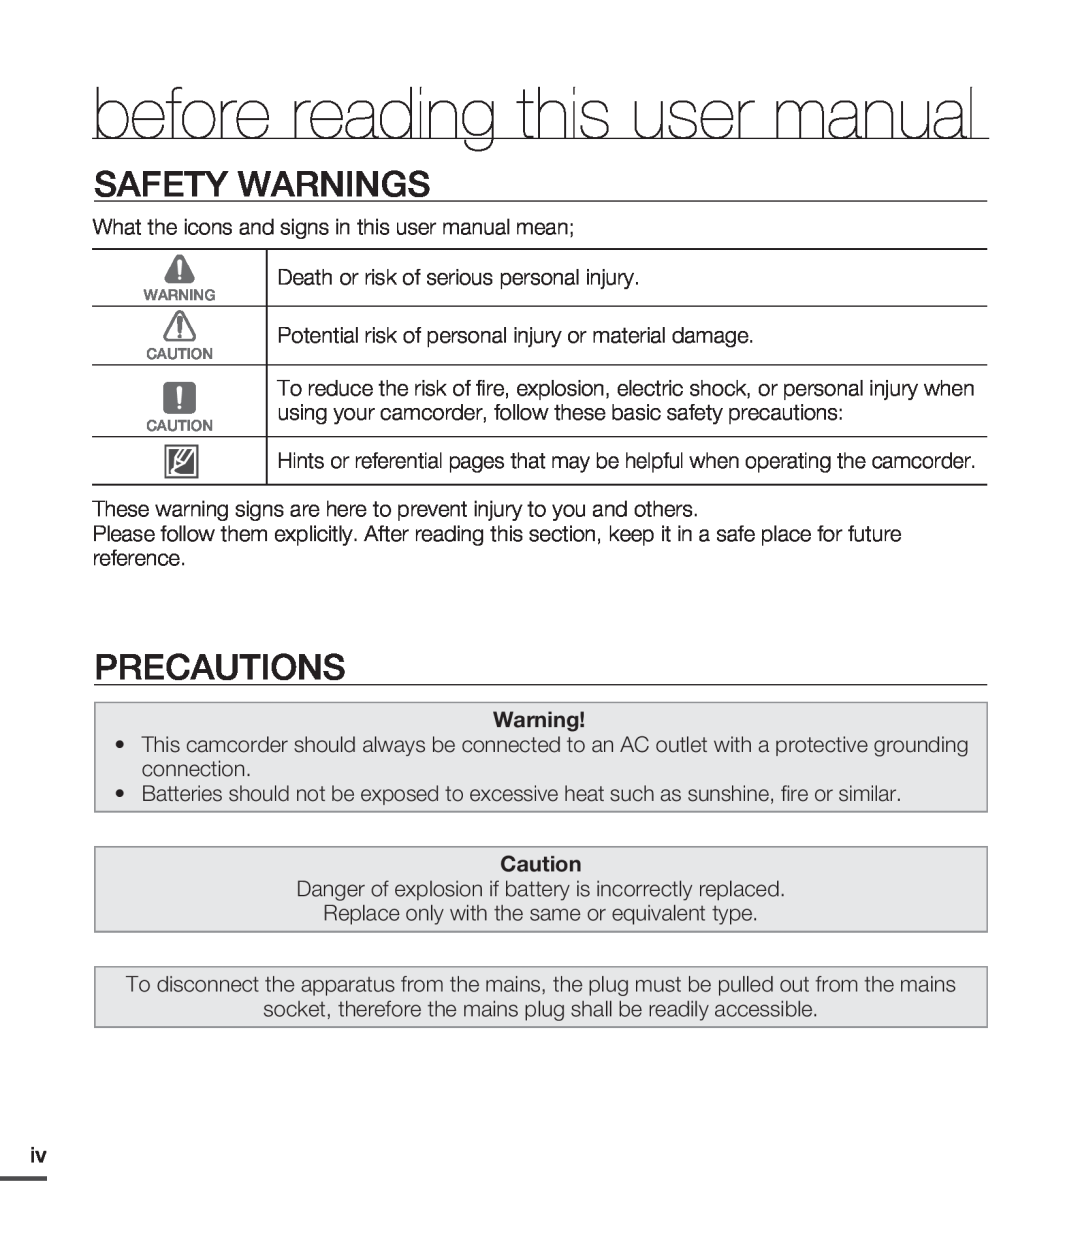 Samsung SMX-C20LN/XAA, SMX-C24BP/EDC, SMX-C200LP/EDC before reading this user manual, Safety Warnings, Precautions 